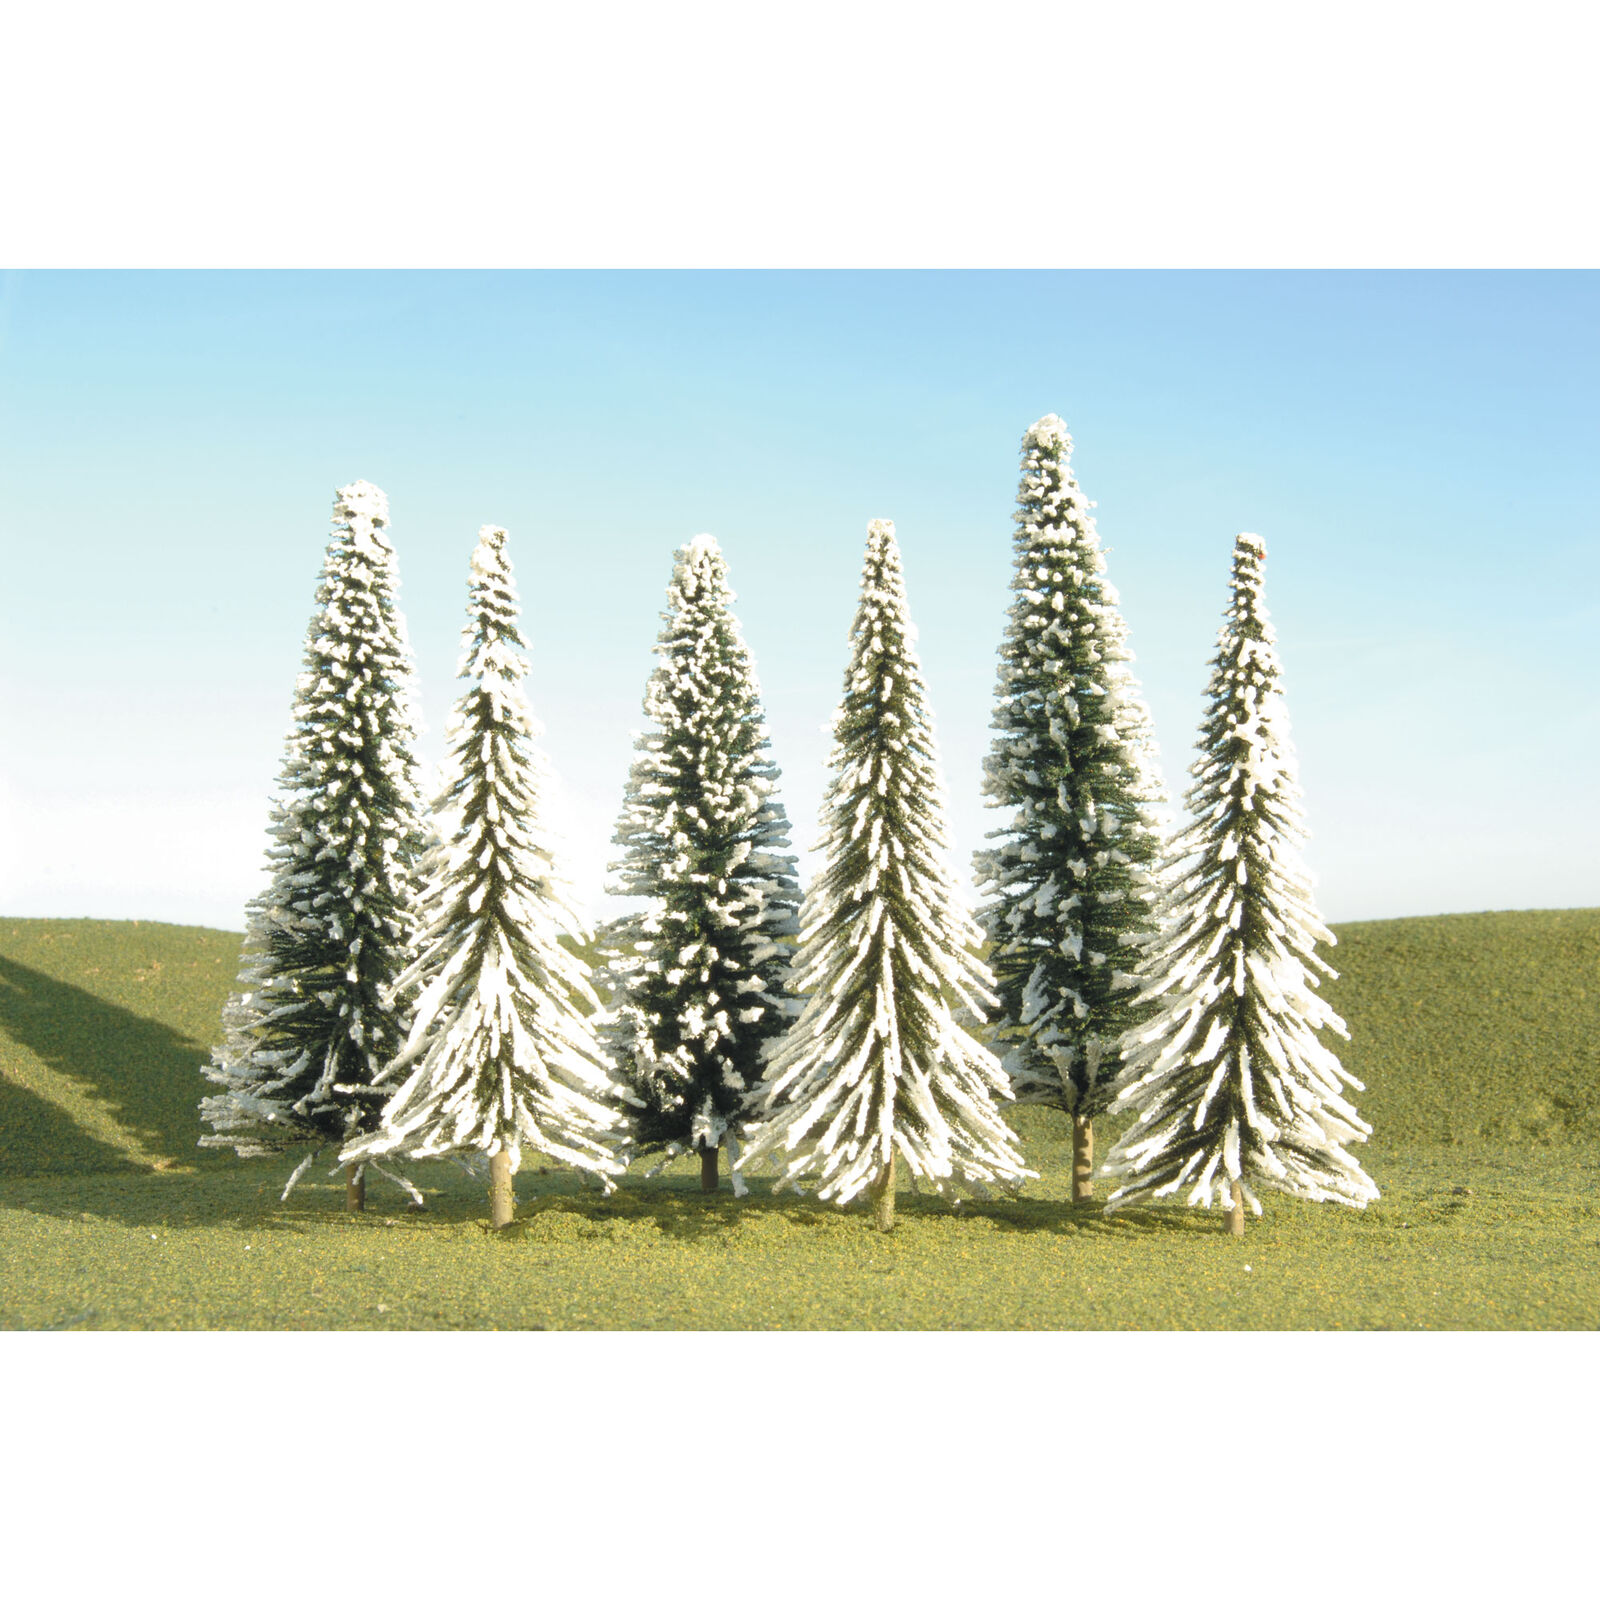 Scenescapes Pine Trees with Snow, 5-6" (6)